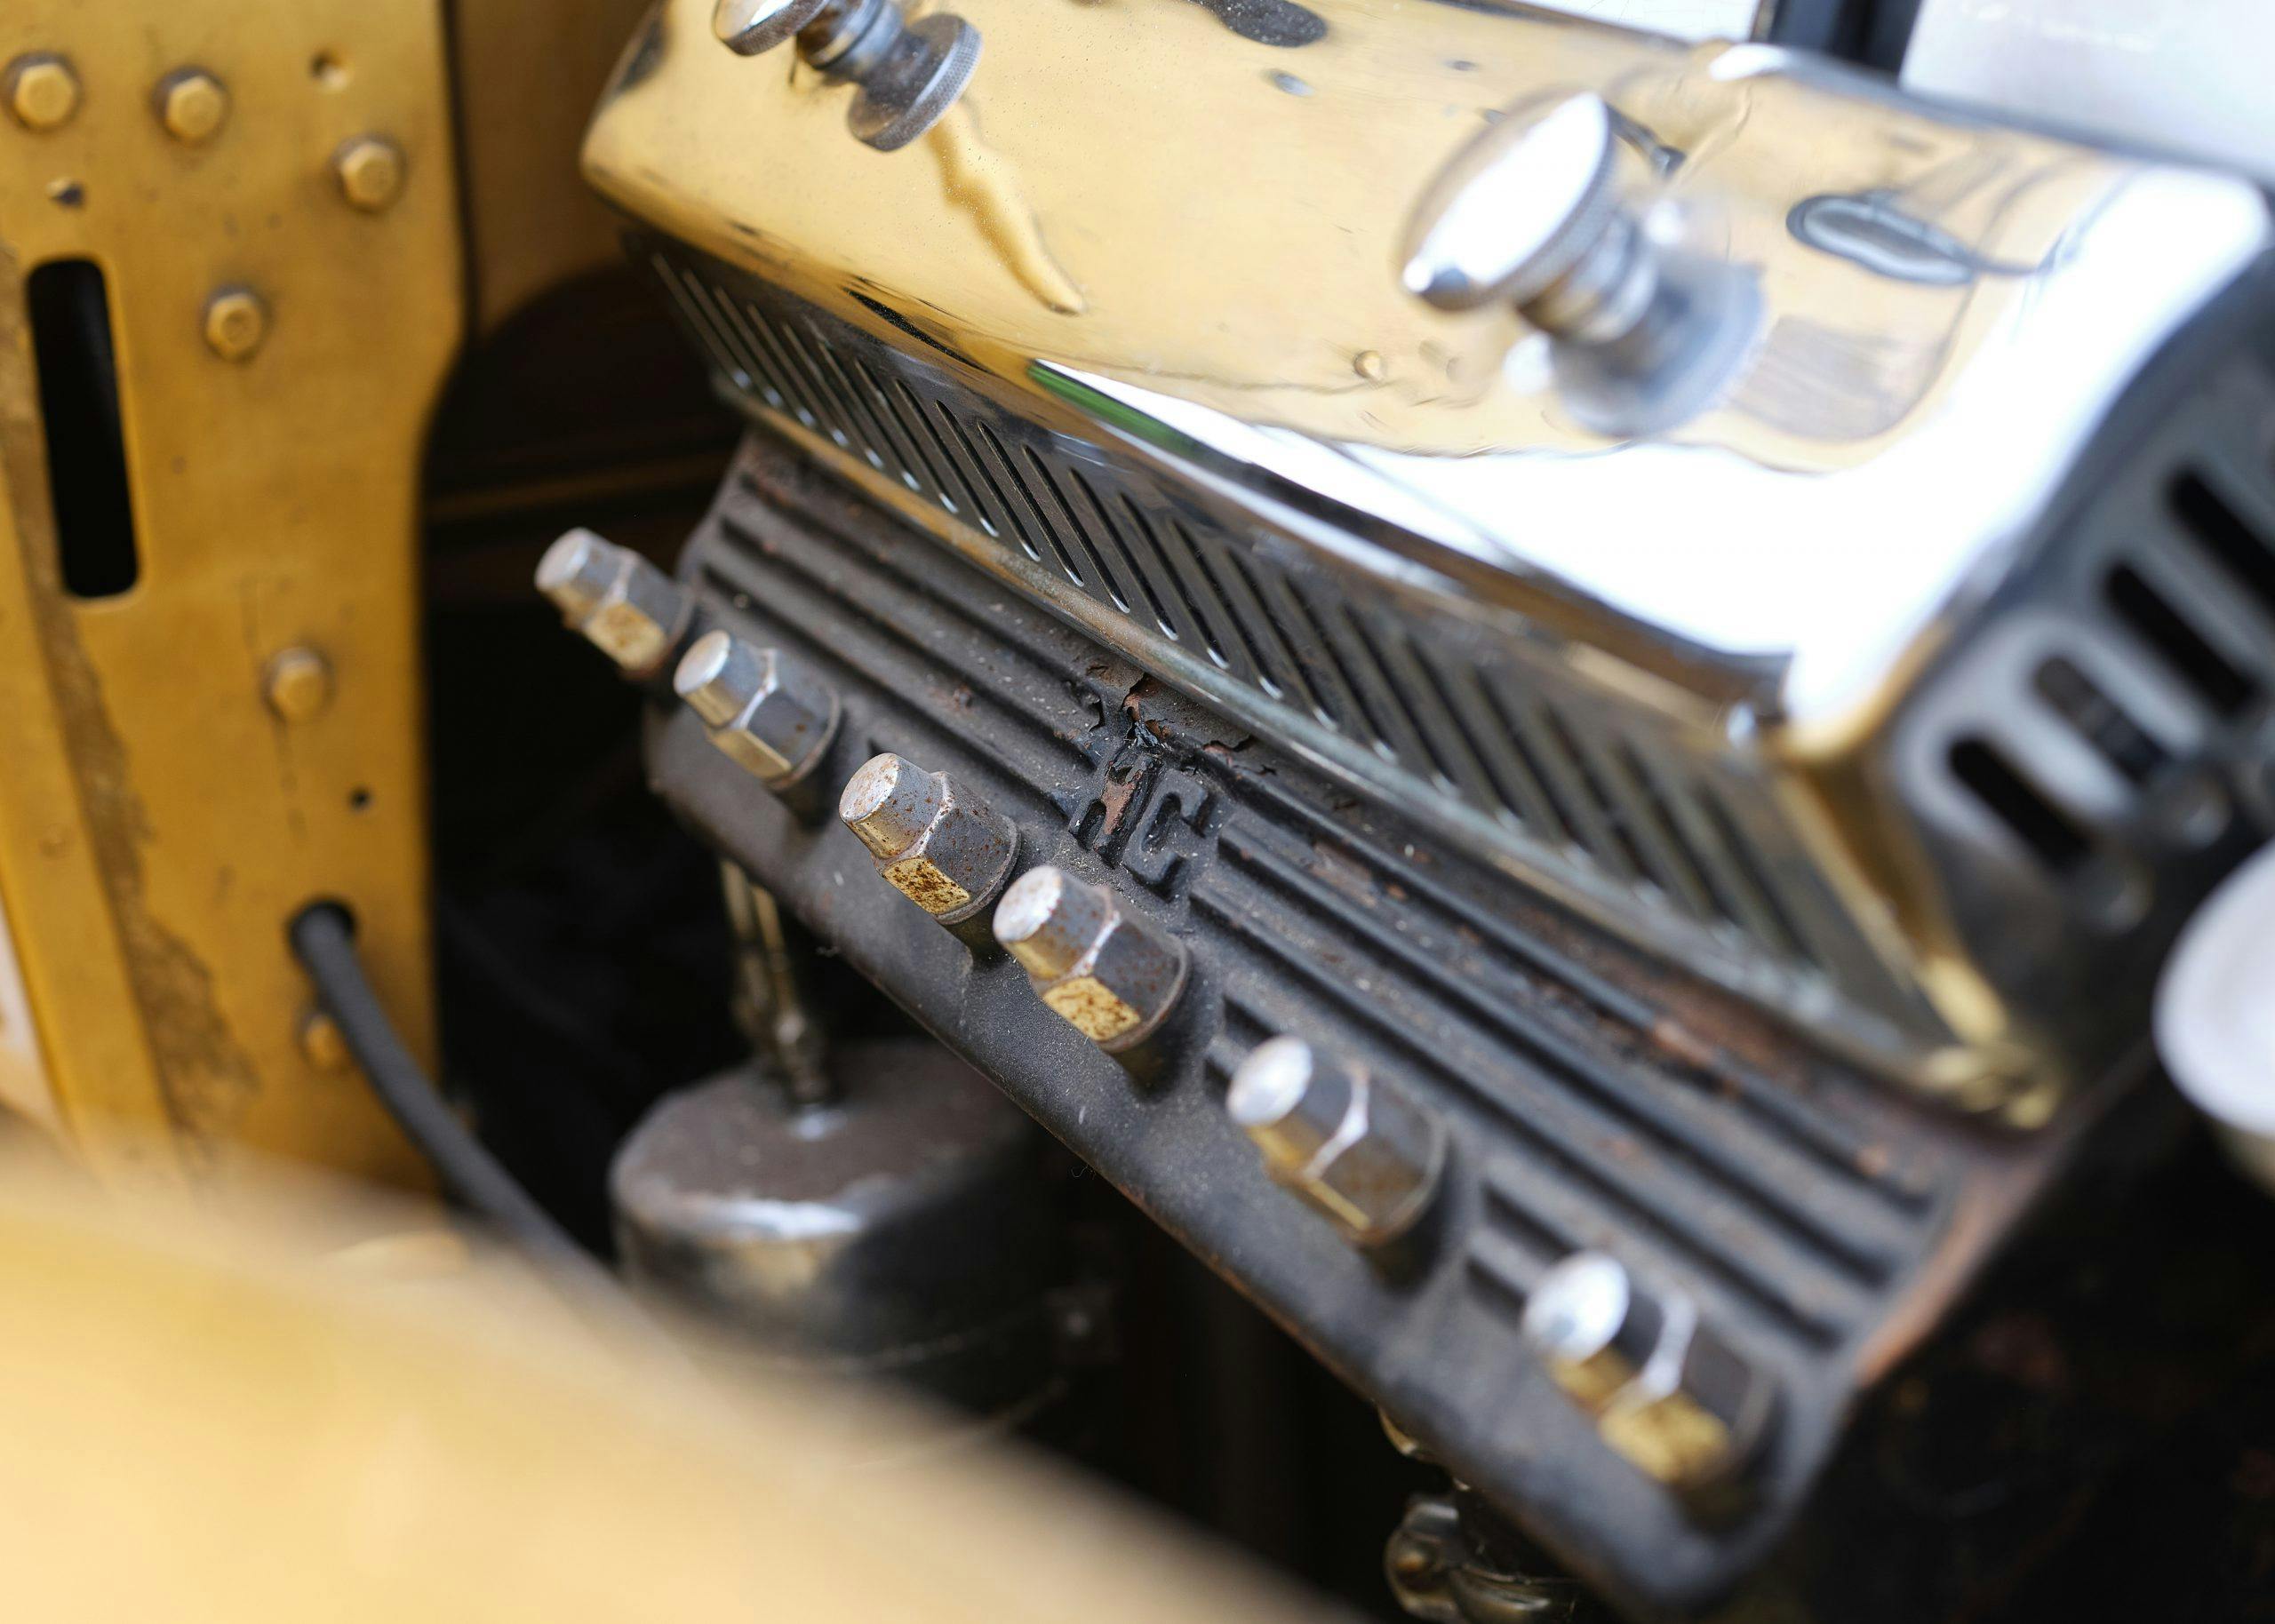 1931 Cadillac V-8 Convertible Coupe engine detail close